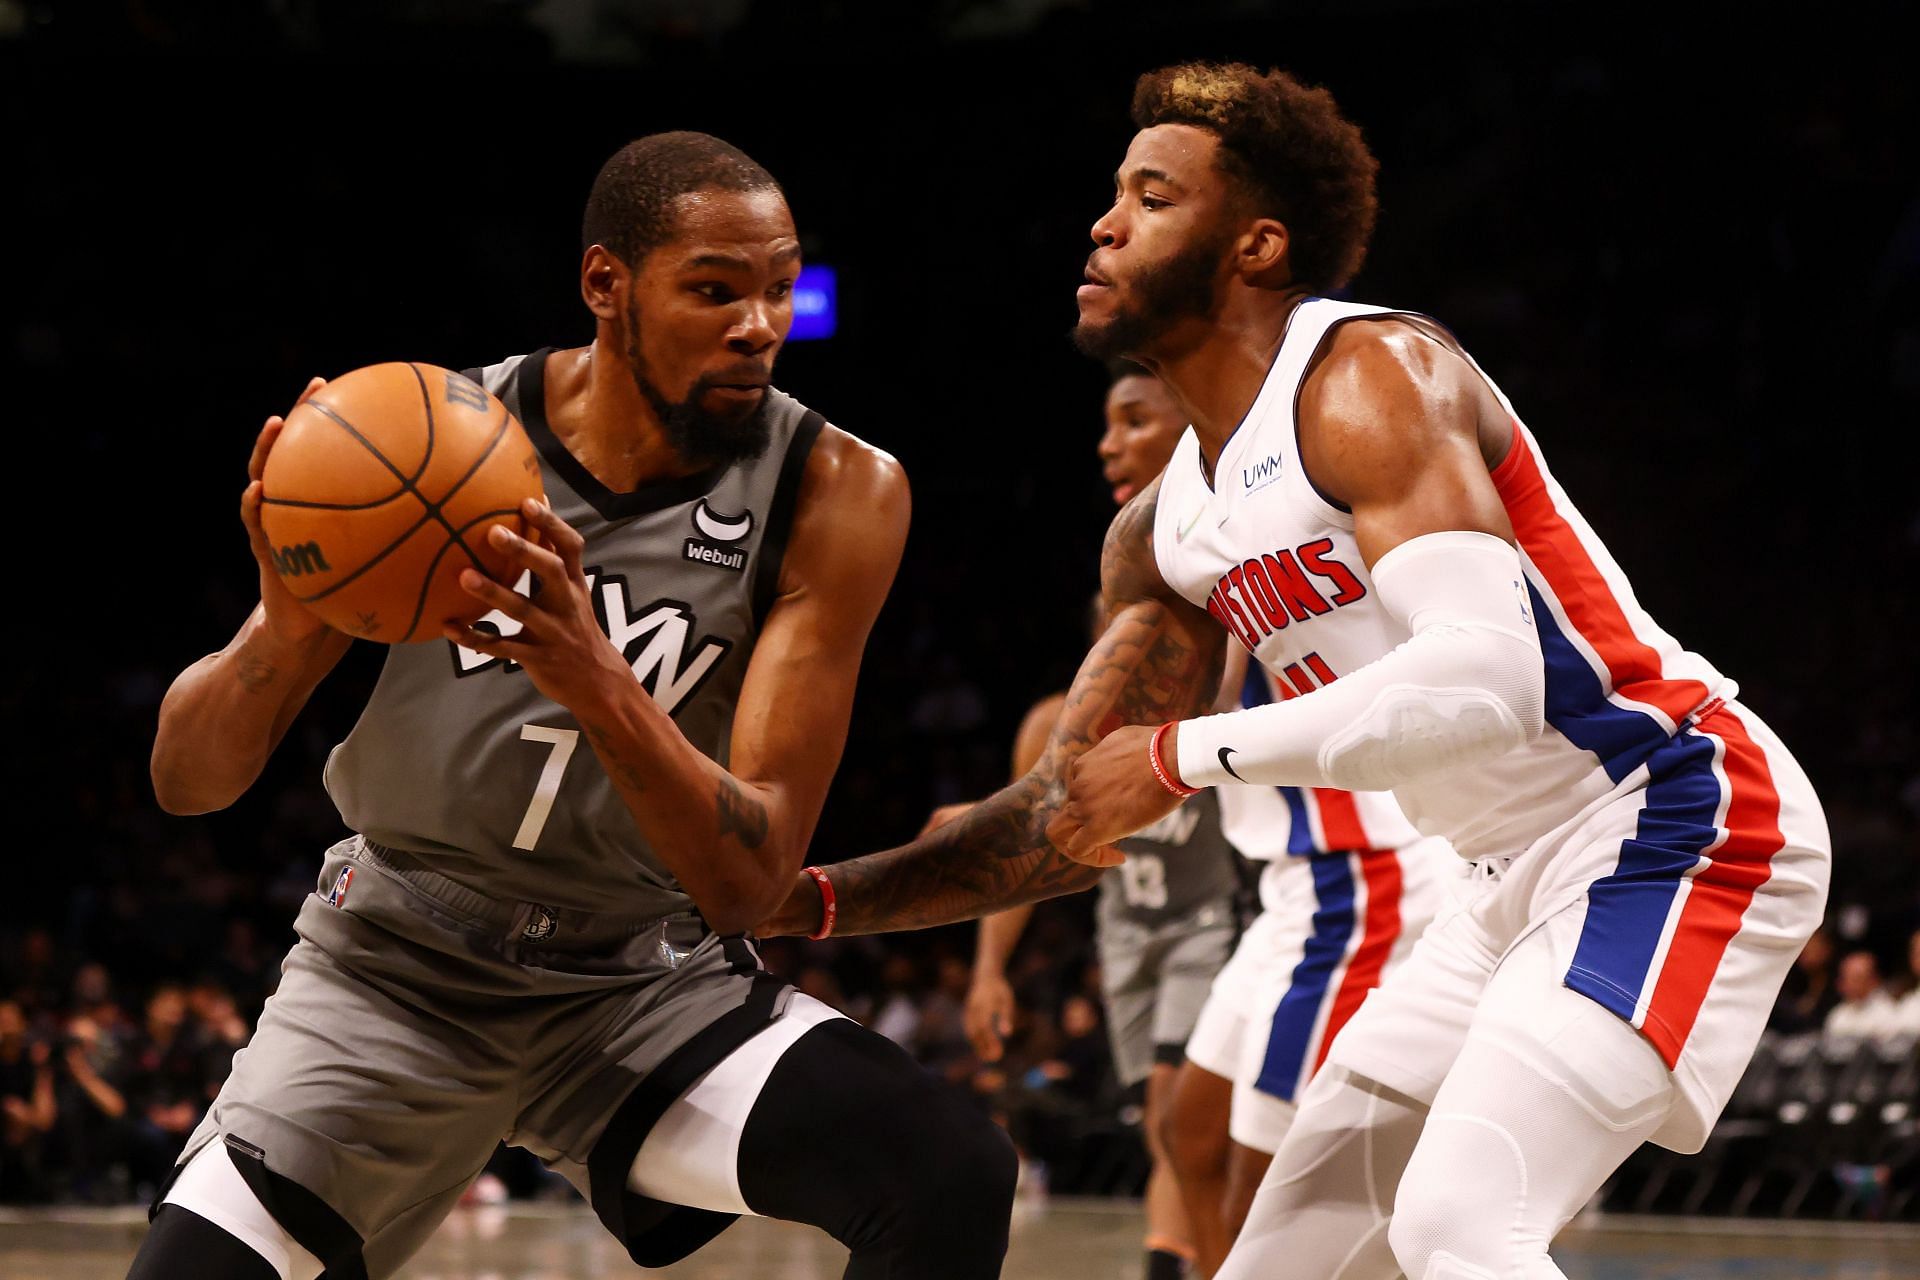 Kevin Durant (#7) of the Brooklyn Nets drives to the net against Saddiq Bey (#41) of the Detroit Pistons.